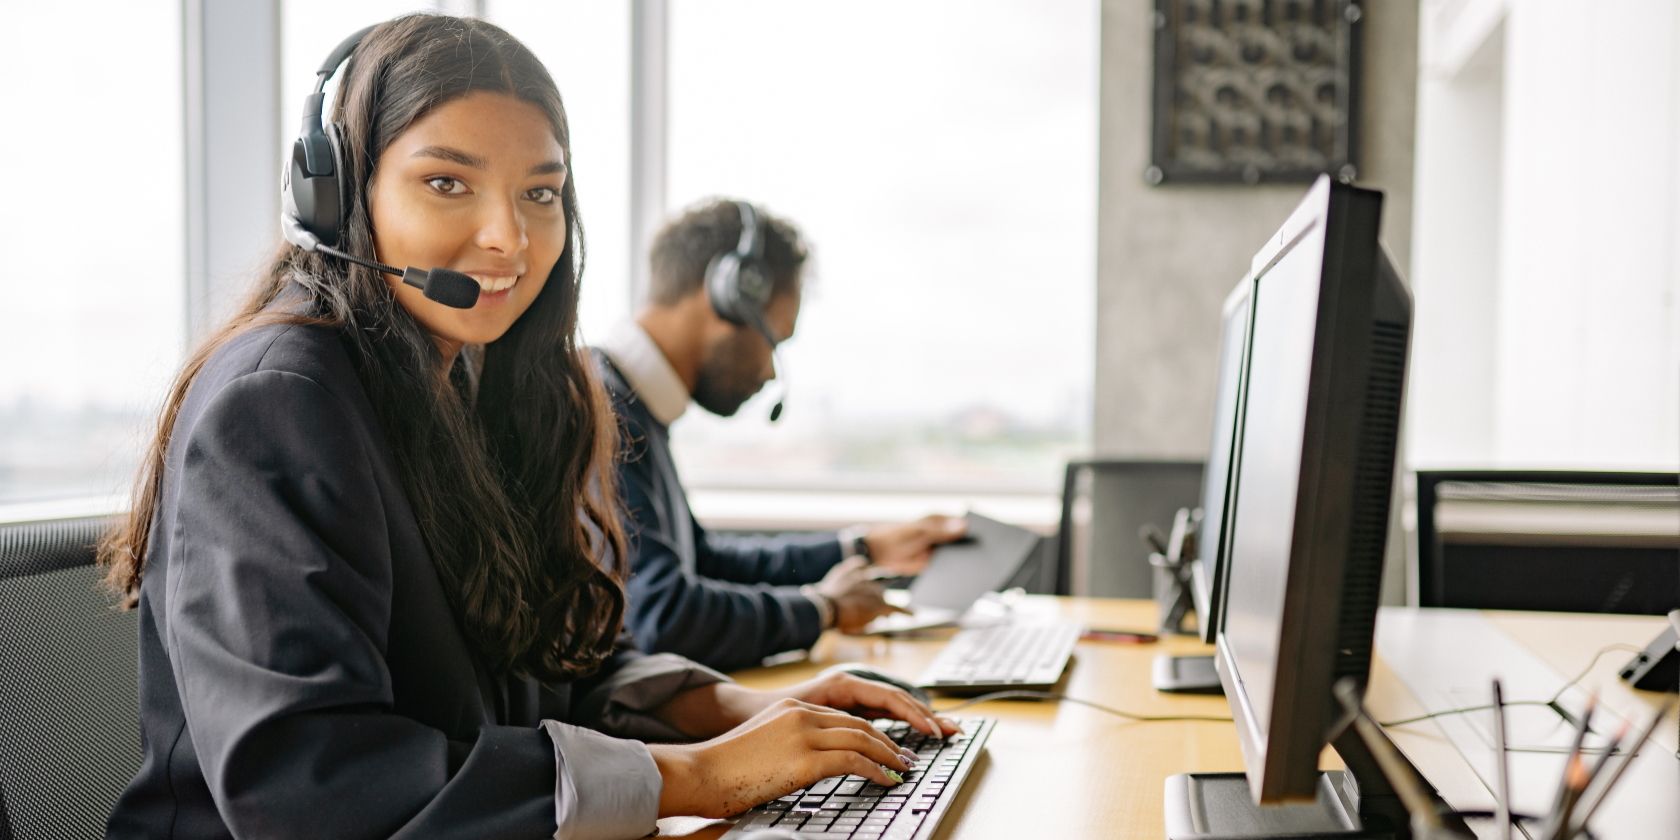 A smiling woman working in a call center.